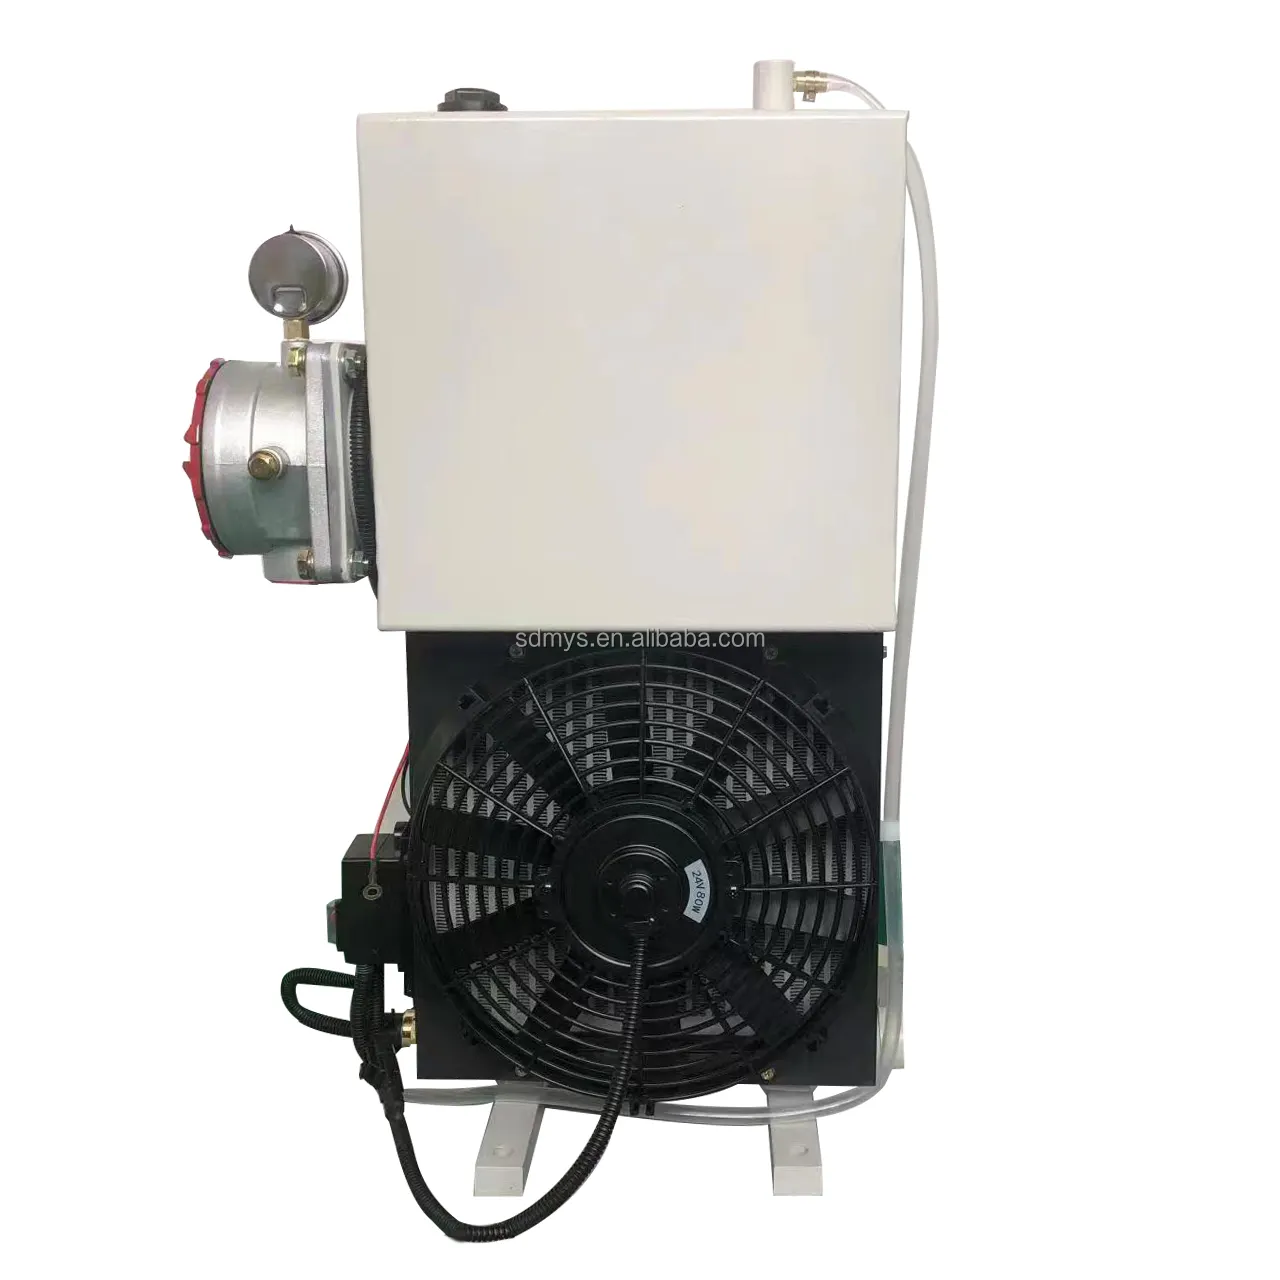 Live broadcast custom Truck hydraulic oil cooler mixer complete coolers radiator with tank